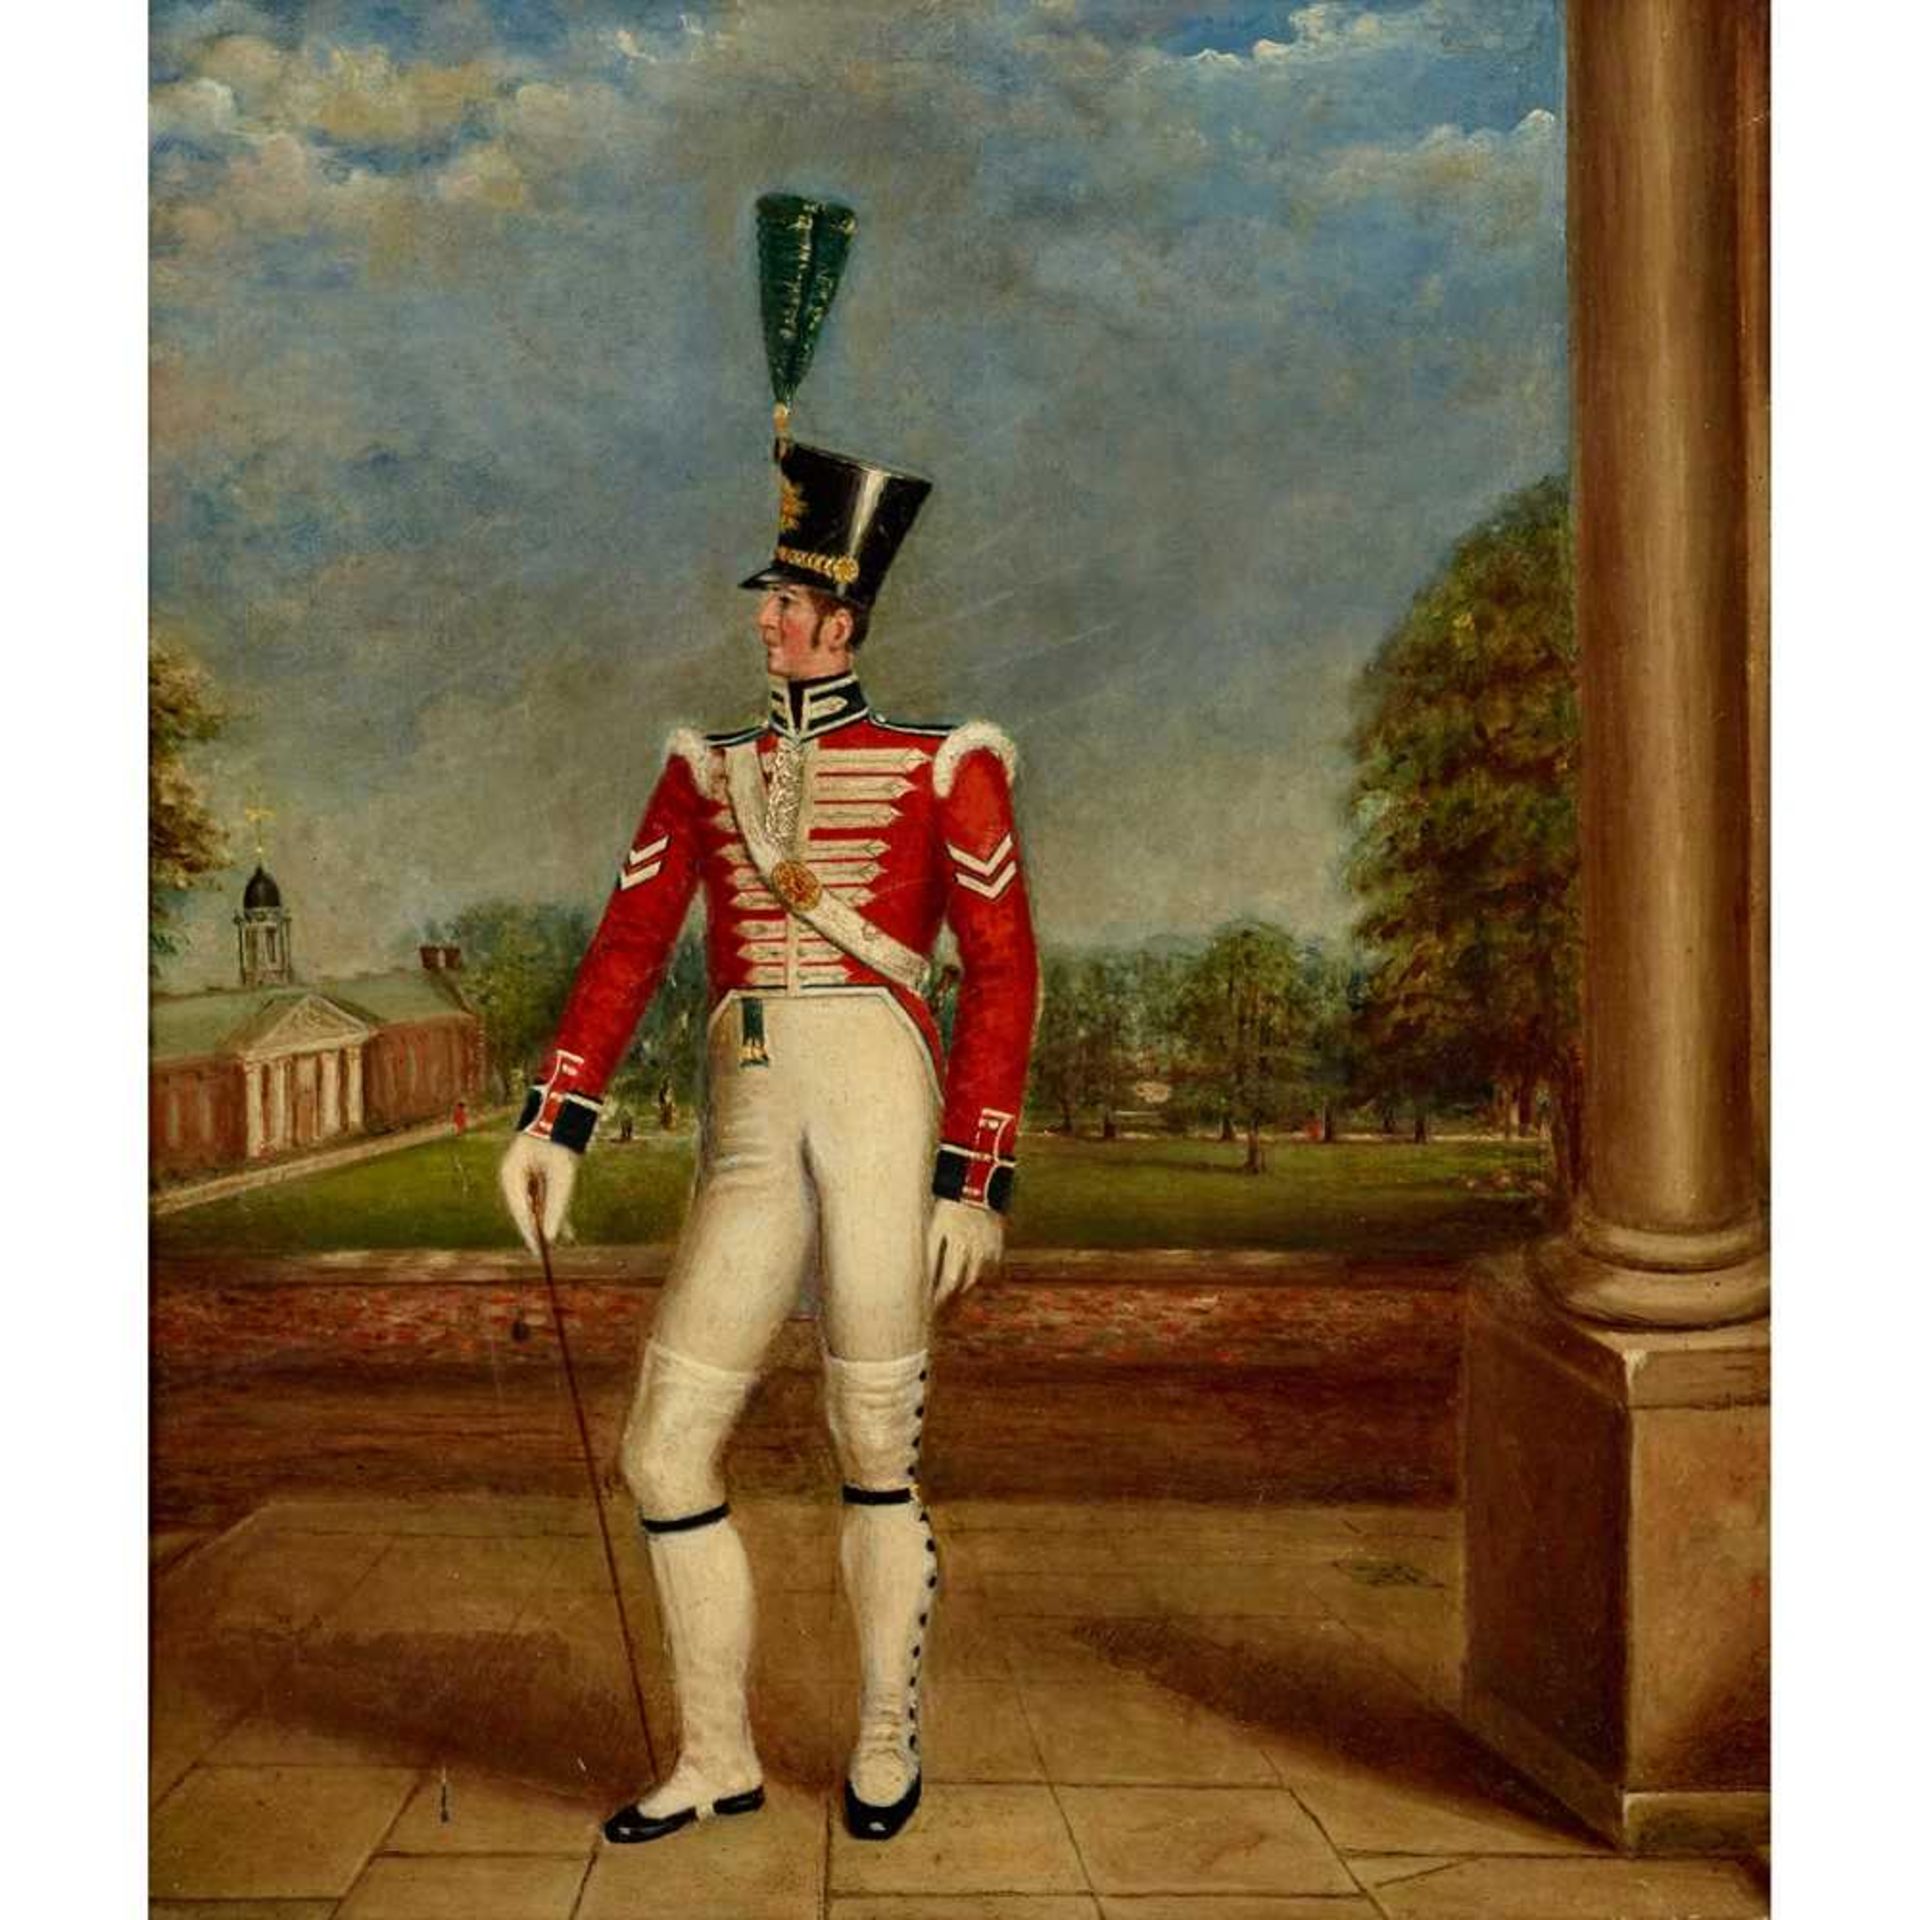 19TH CENTURY BRITISH SCHOOL FULL LENGTH PORTRAIT OF A CORPORAL, LIGHT COMPANY, 3RD FOOT GUARDS